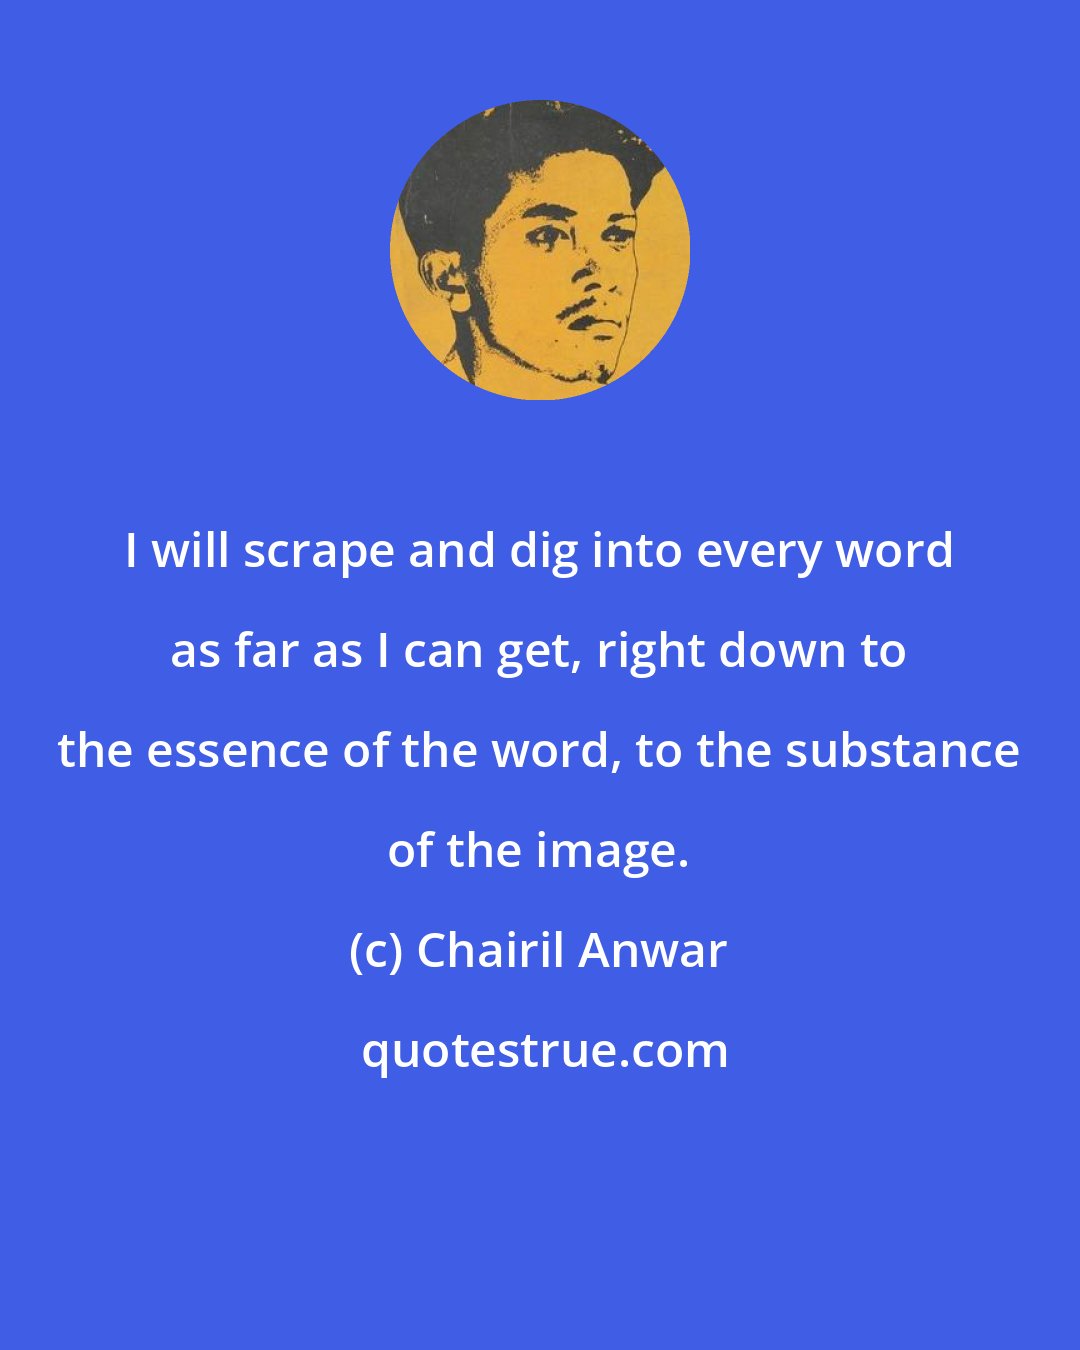 Chairil Anwar: I will scrape and dig into every word as far as I can get, right down to the essence of the word, to the substance of the image.